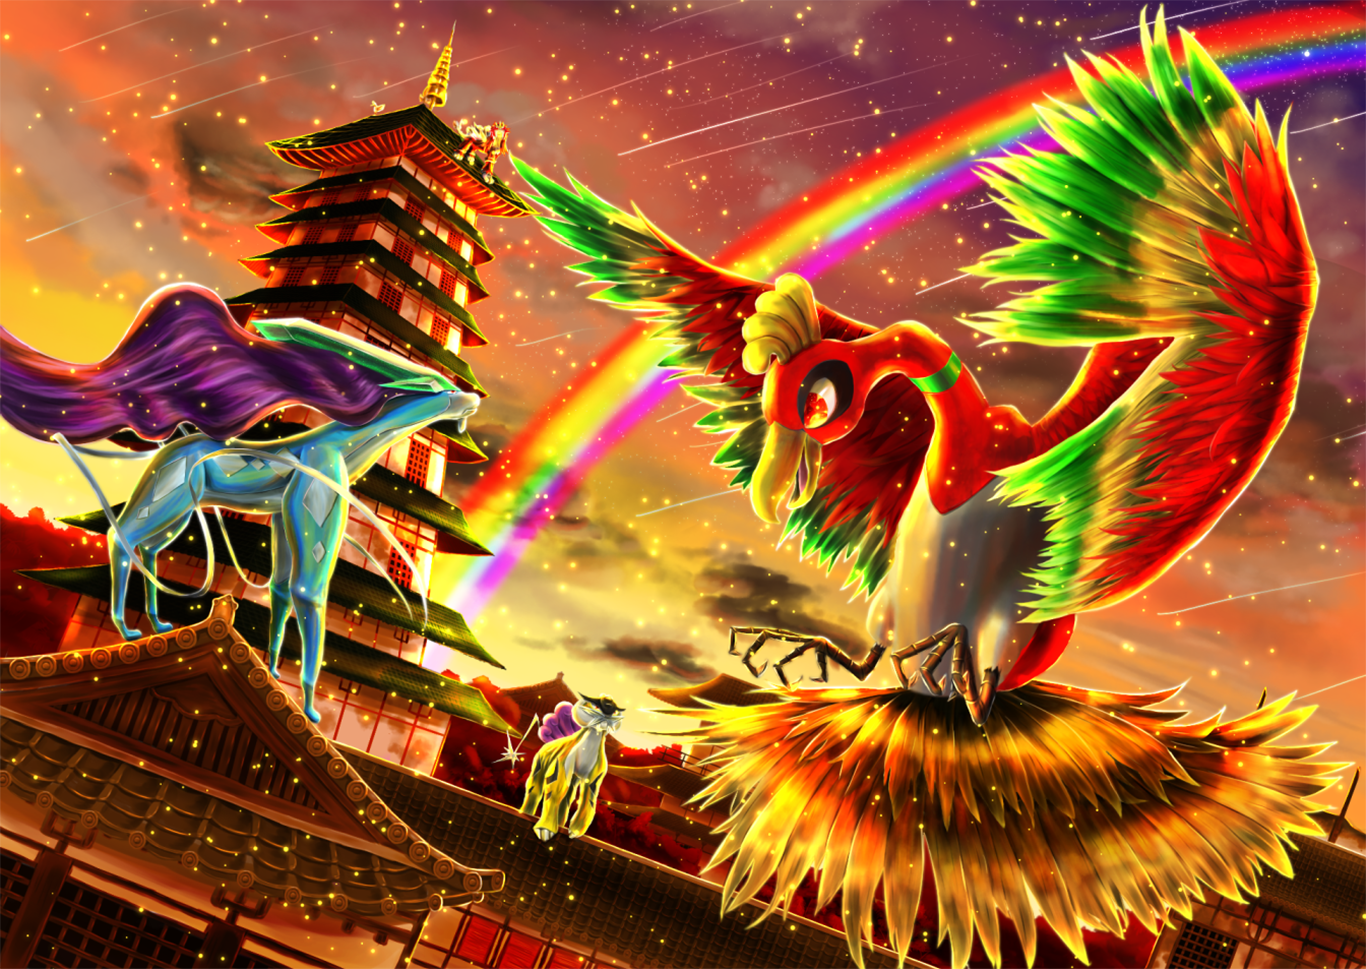 35 Ho Oh Pokemon Hd Wallpapers Background Images Wallpaper Abyss Images, Photos, Reviews